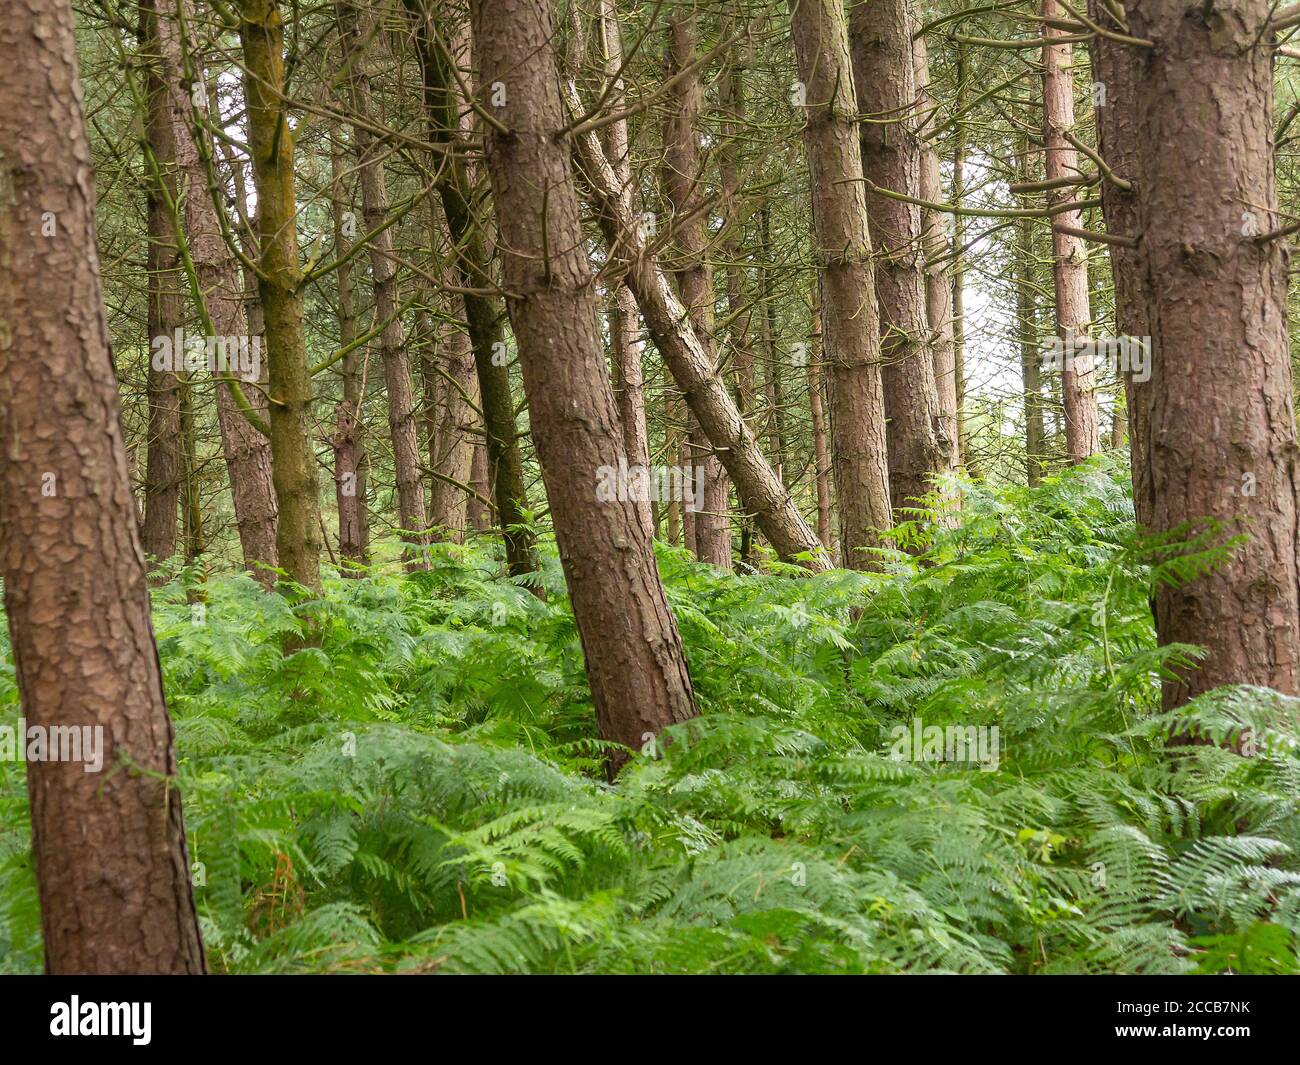 Leaning trees at Daresbury Firs Stock Photo